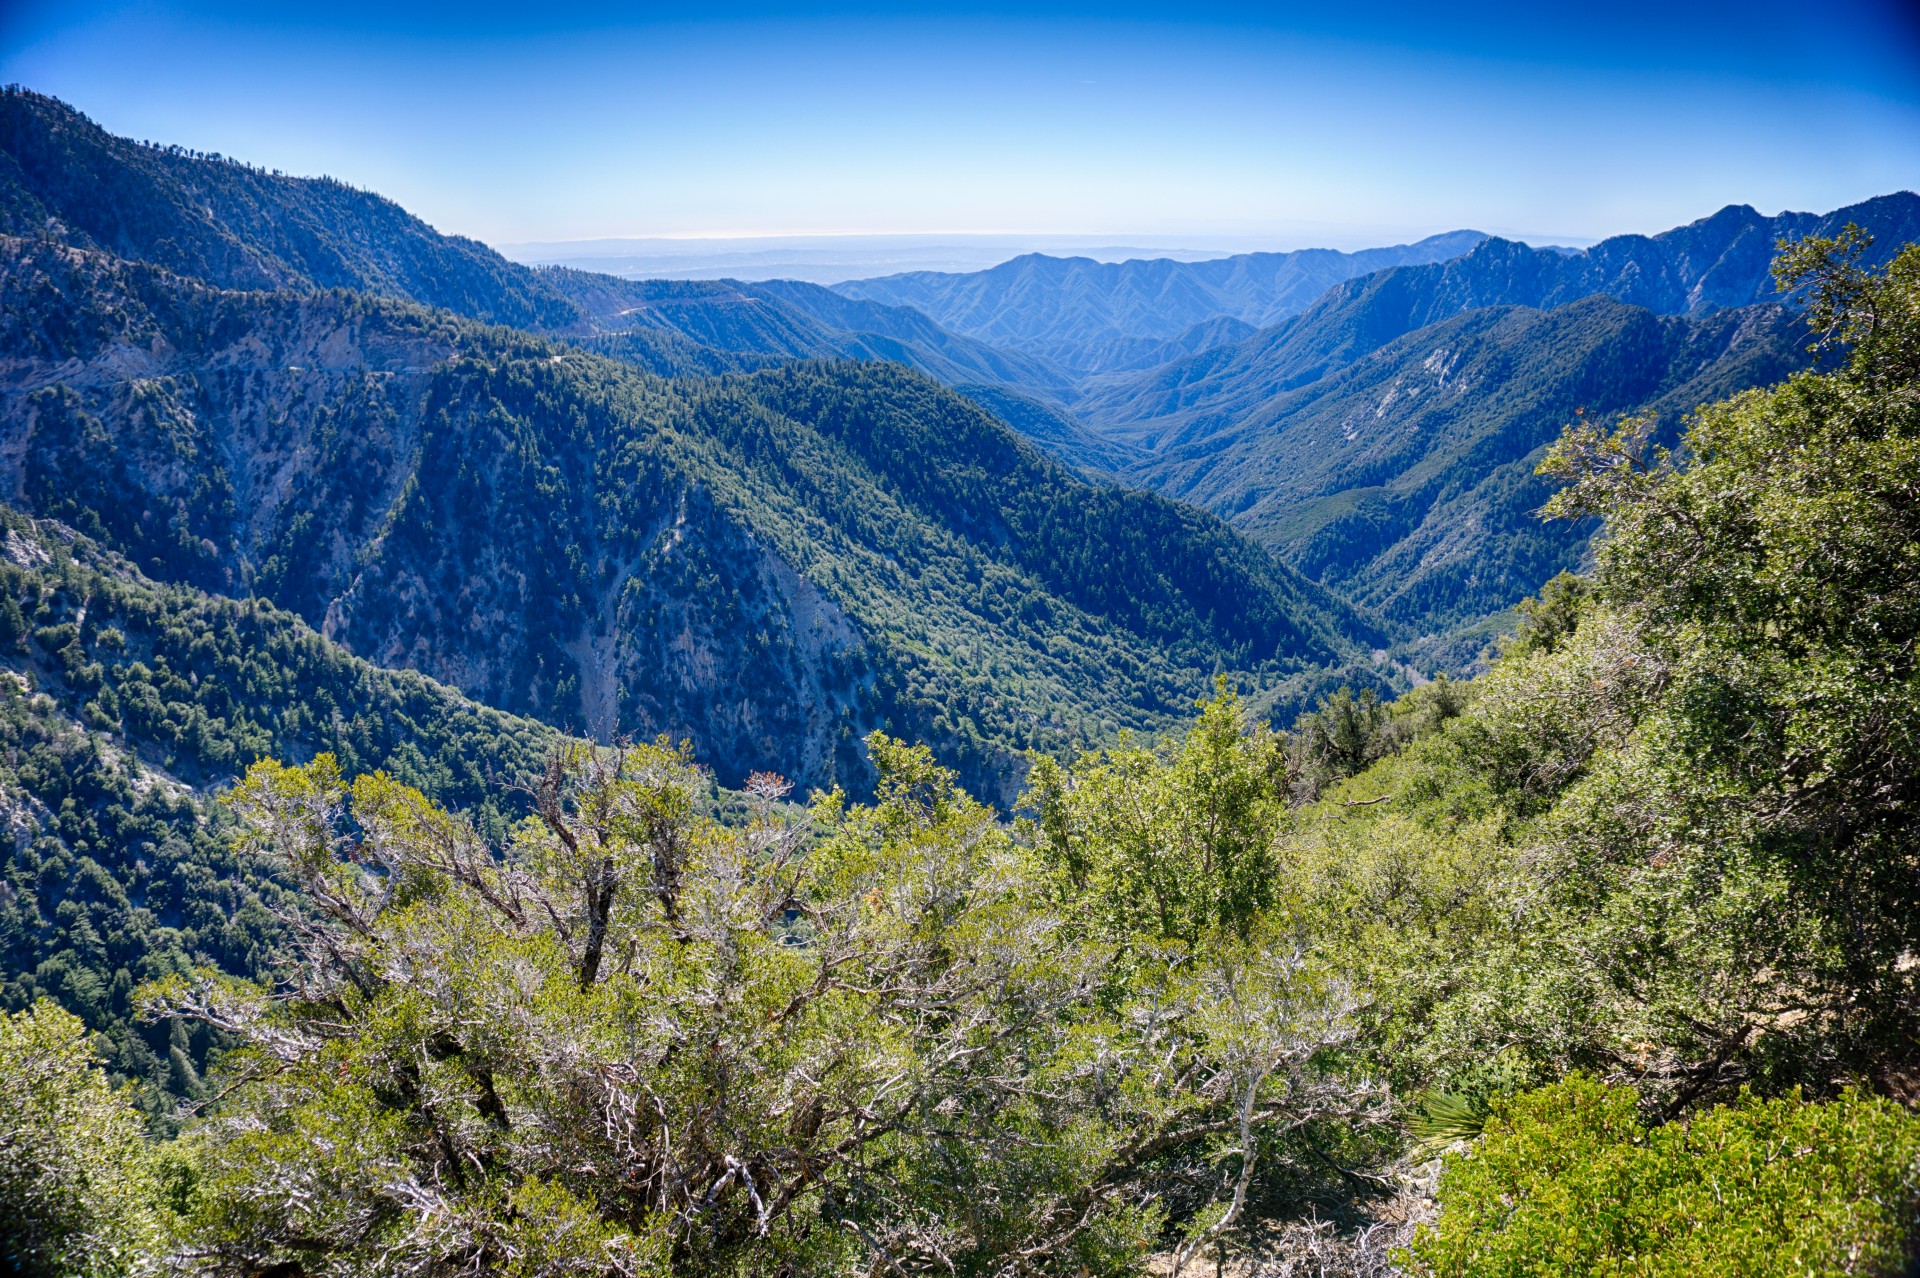 Mountains and hills of Angeles National Forest above Los Angeles California.